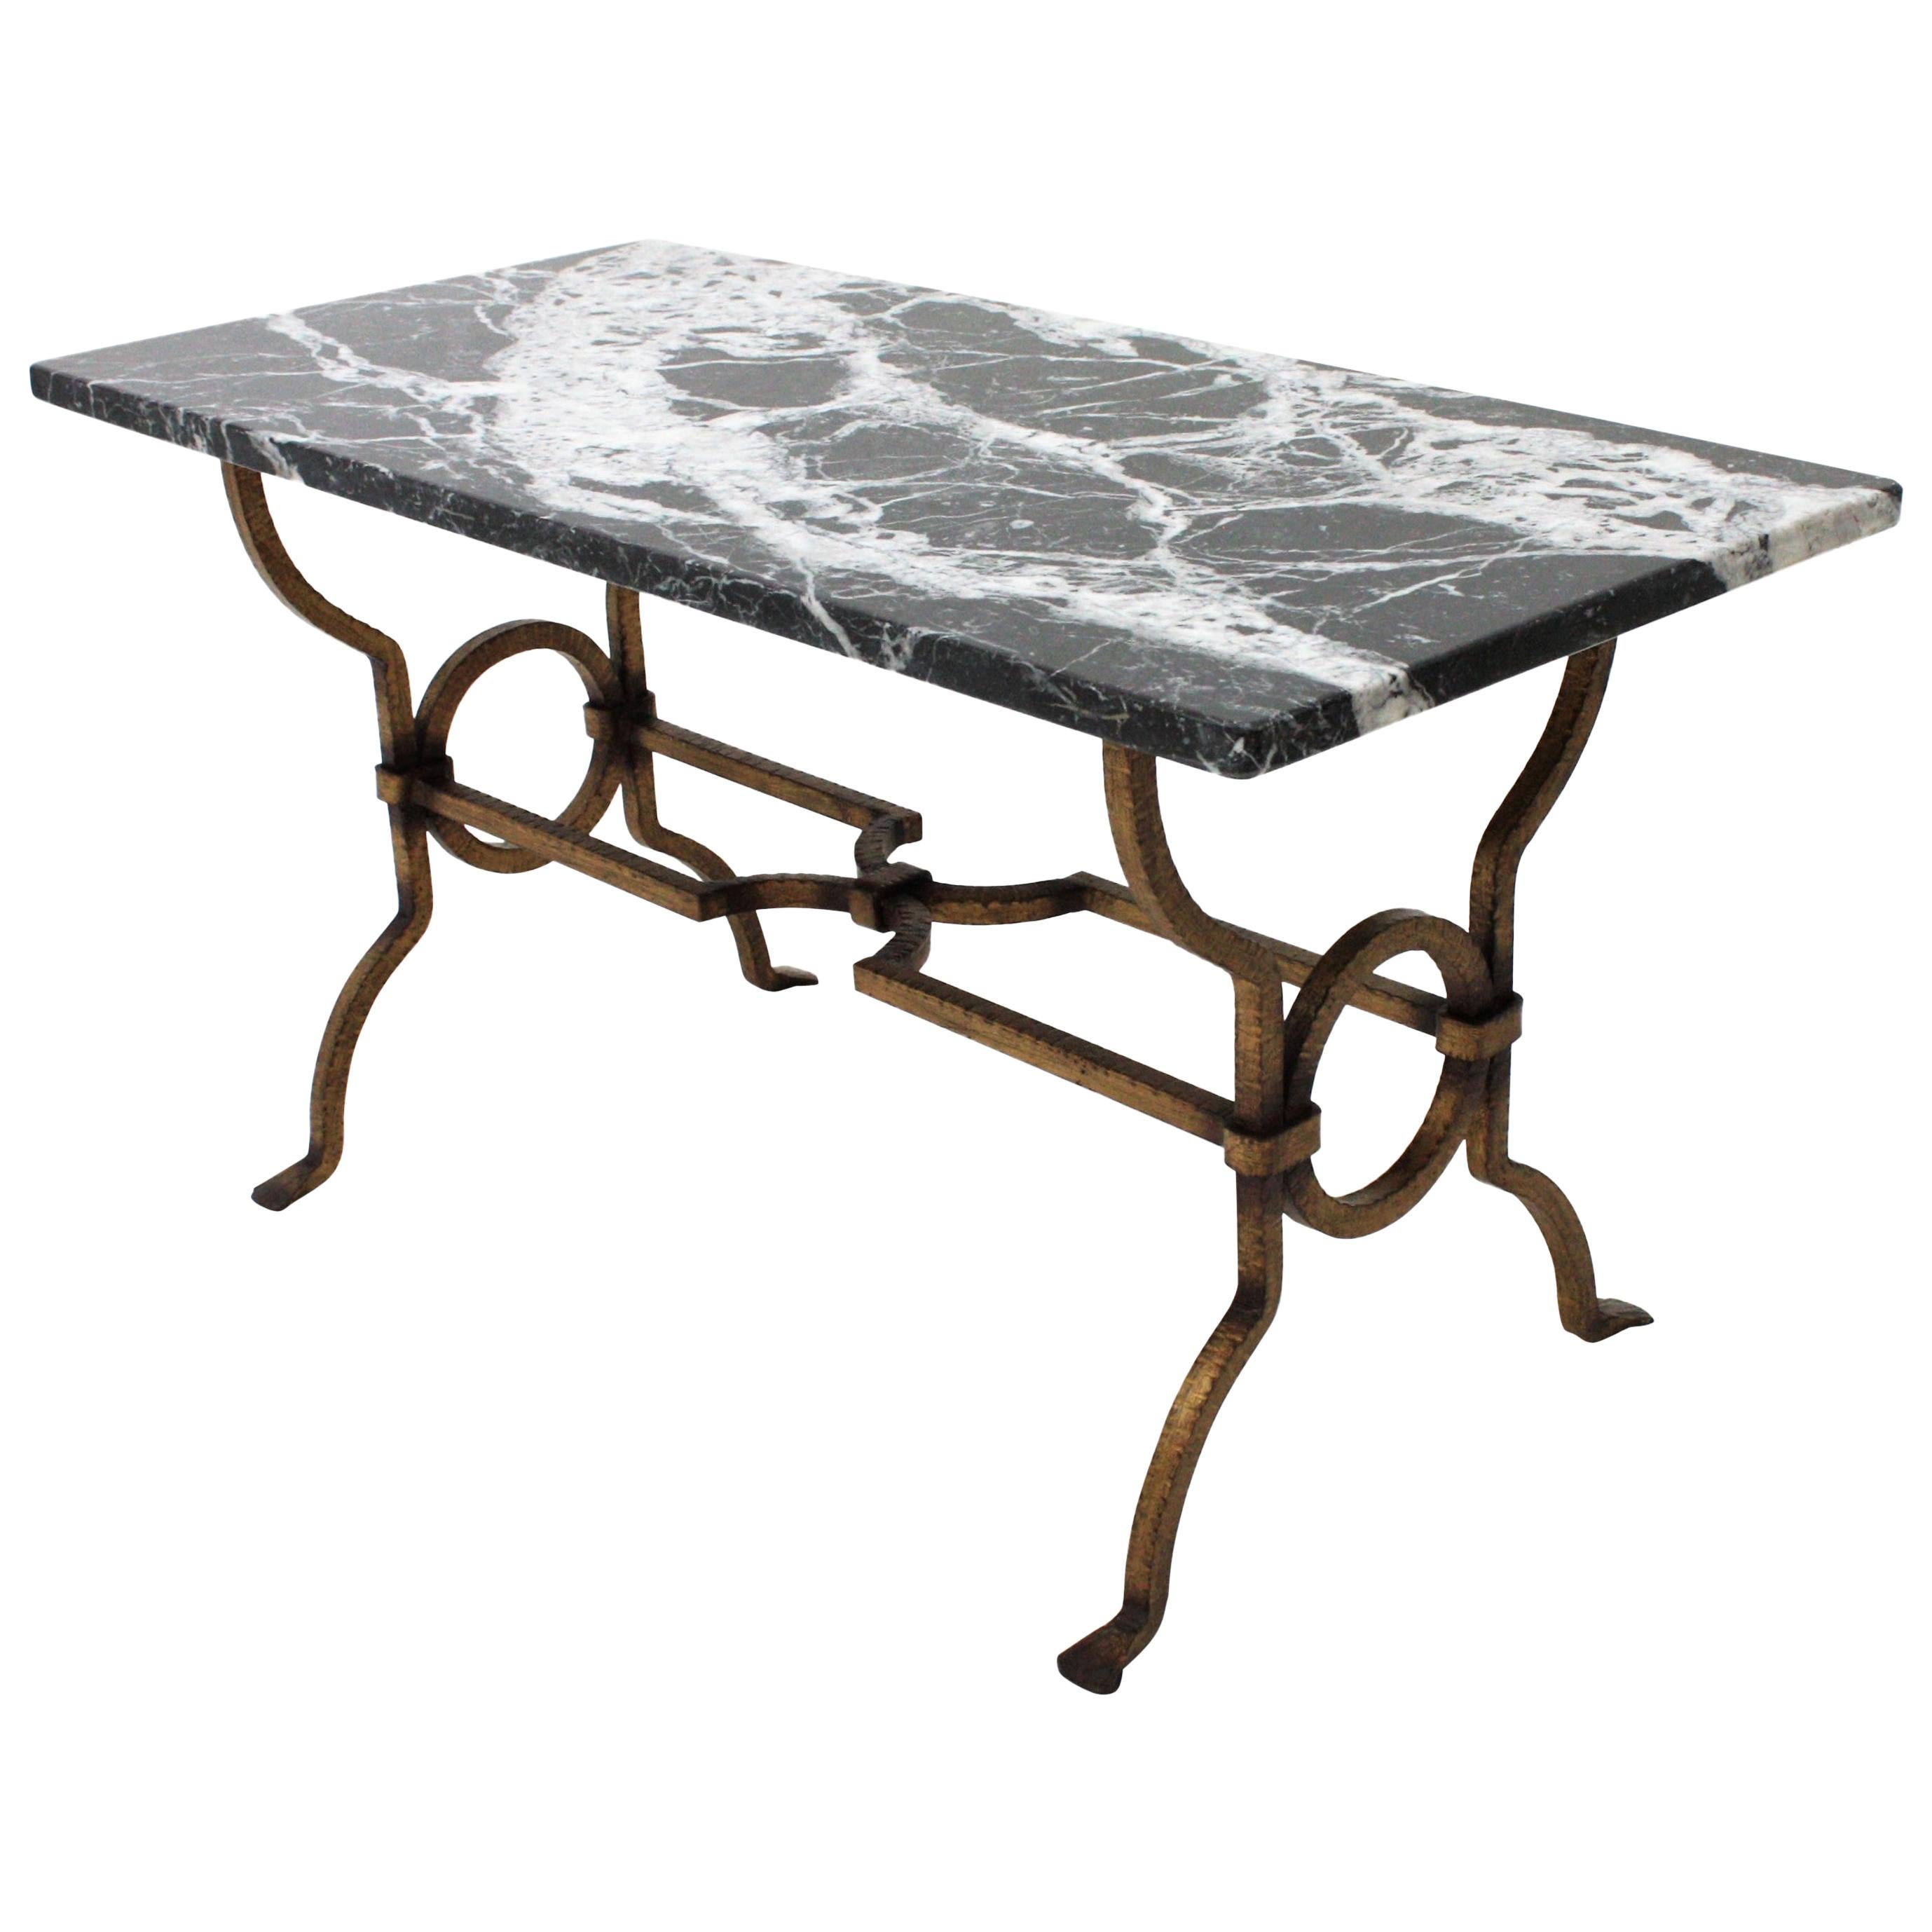 Gilbert Poillerat Gilt Iron Coffee Table with Black and White Marble Top